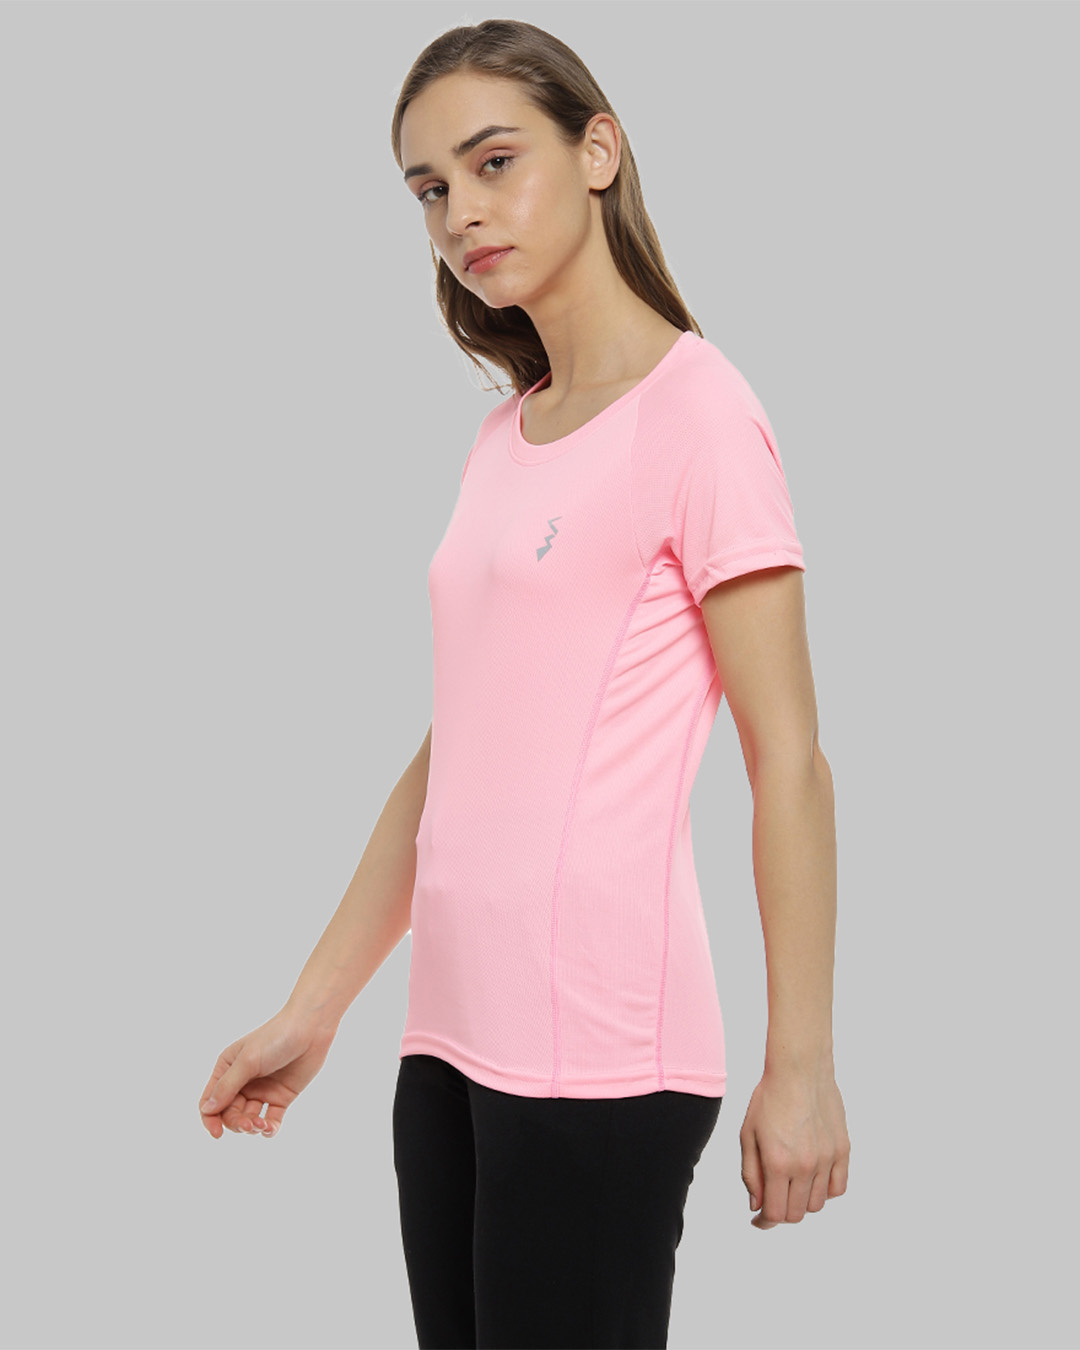 Shop Solid Women's Round Neck Pink Sports Jersey T-Shirt-Back